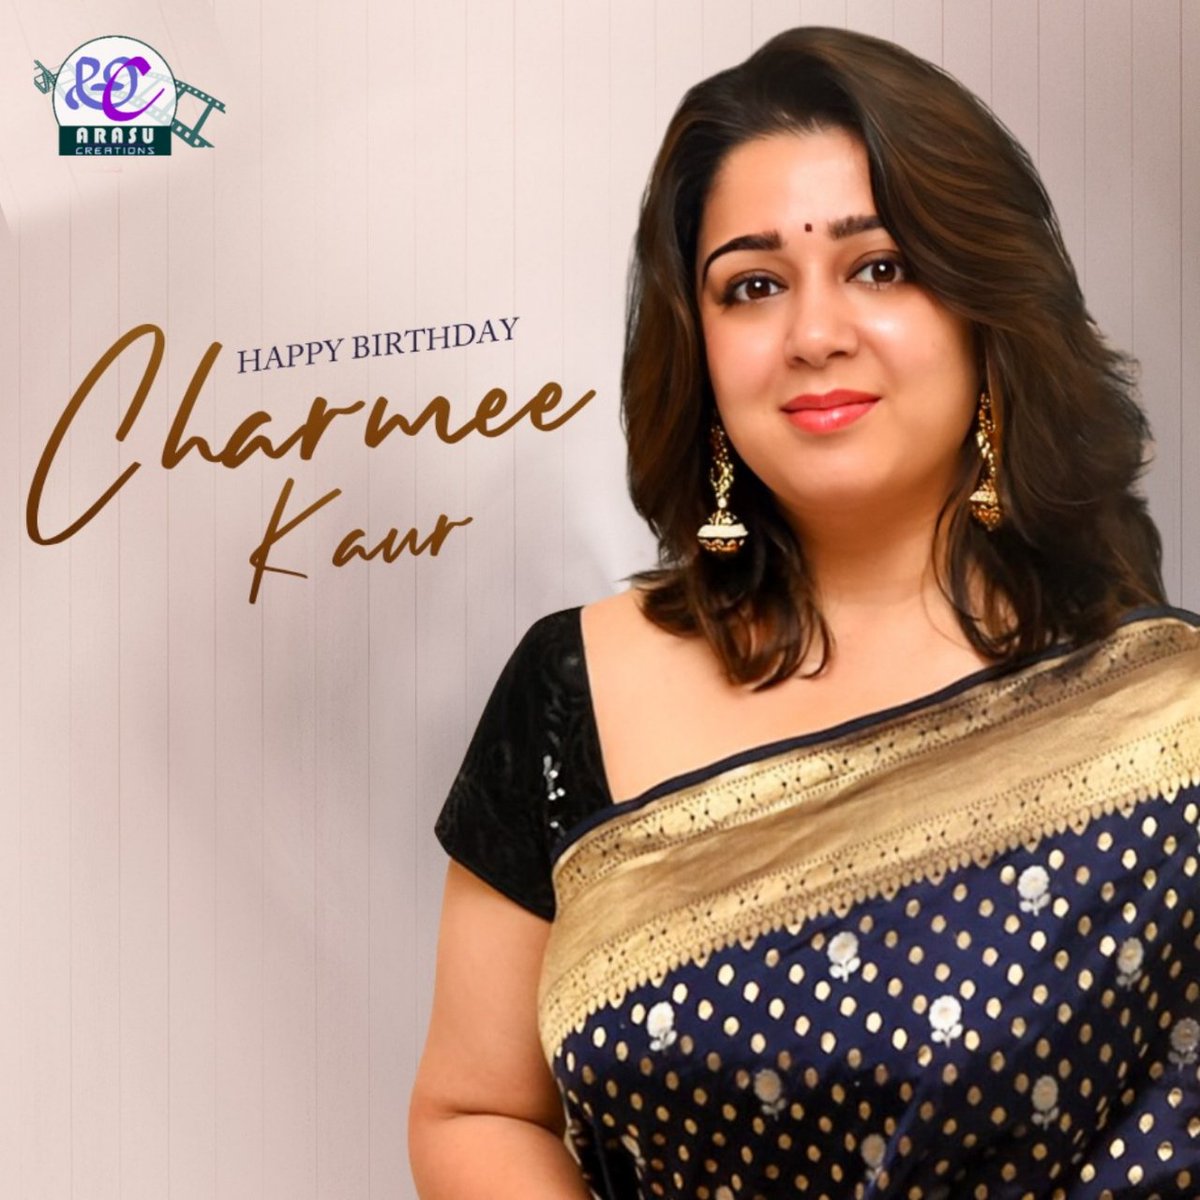 Happy Birthday Boss Lady @Charmmeofficial ❤️ Best wishes for #DoubleISMART and all your future projects.🙌 @PuriConnects